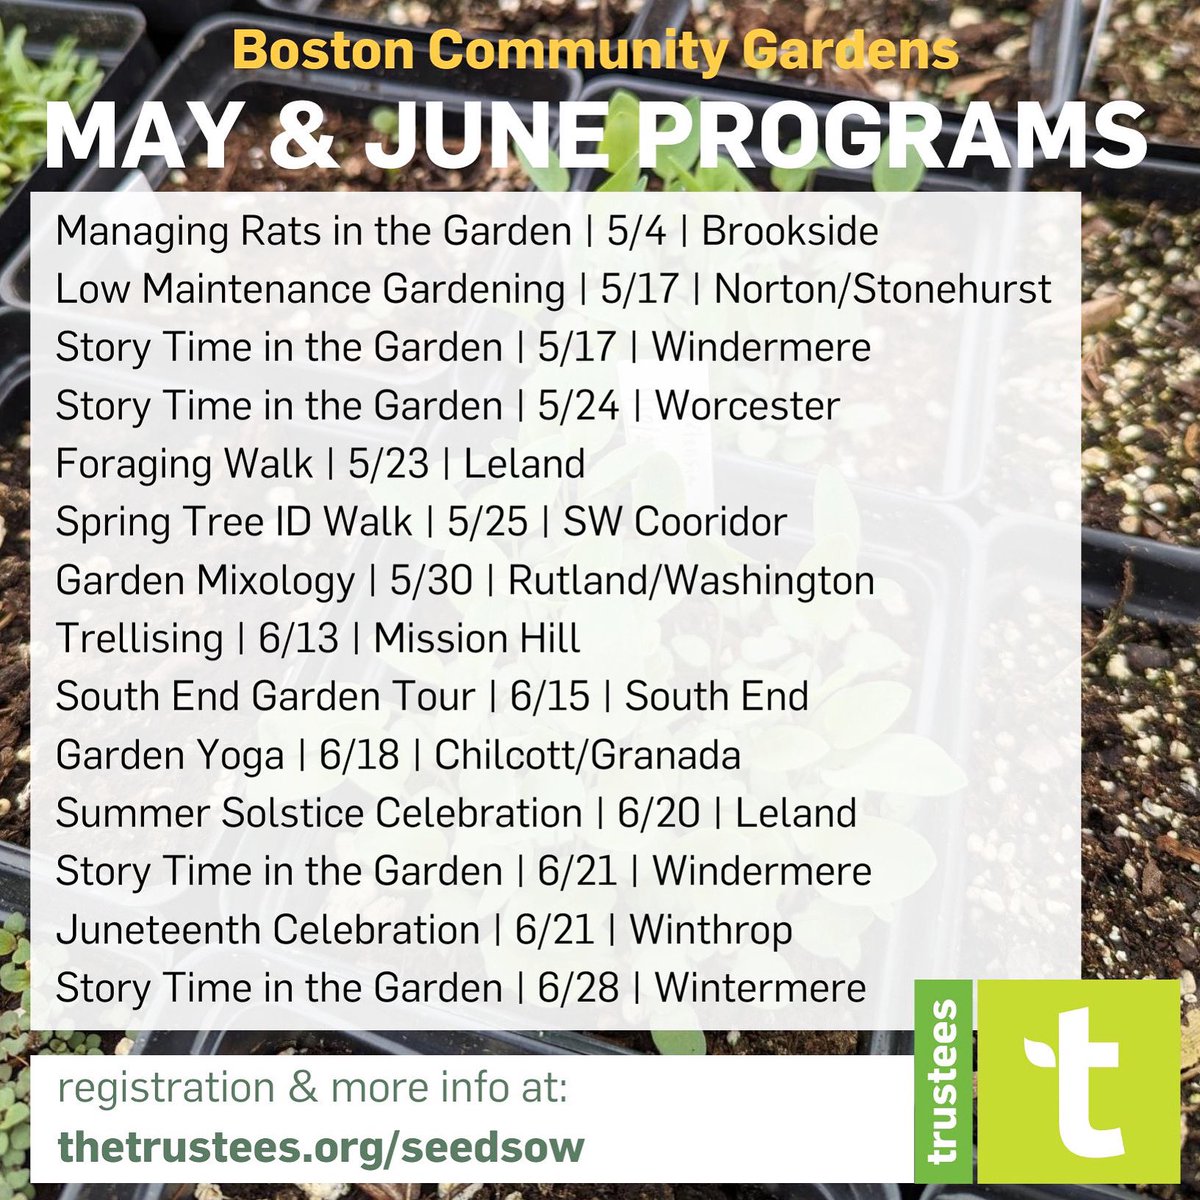 Spring is here! Join us at one of our many events in May & June. Register at thetrustees.org/seedsow or at the link in our bio. 
🌱🌱🌱

#boston #communitygardening #events #thingstodo #thetrusteesofreservstions